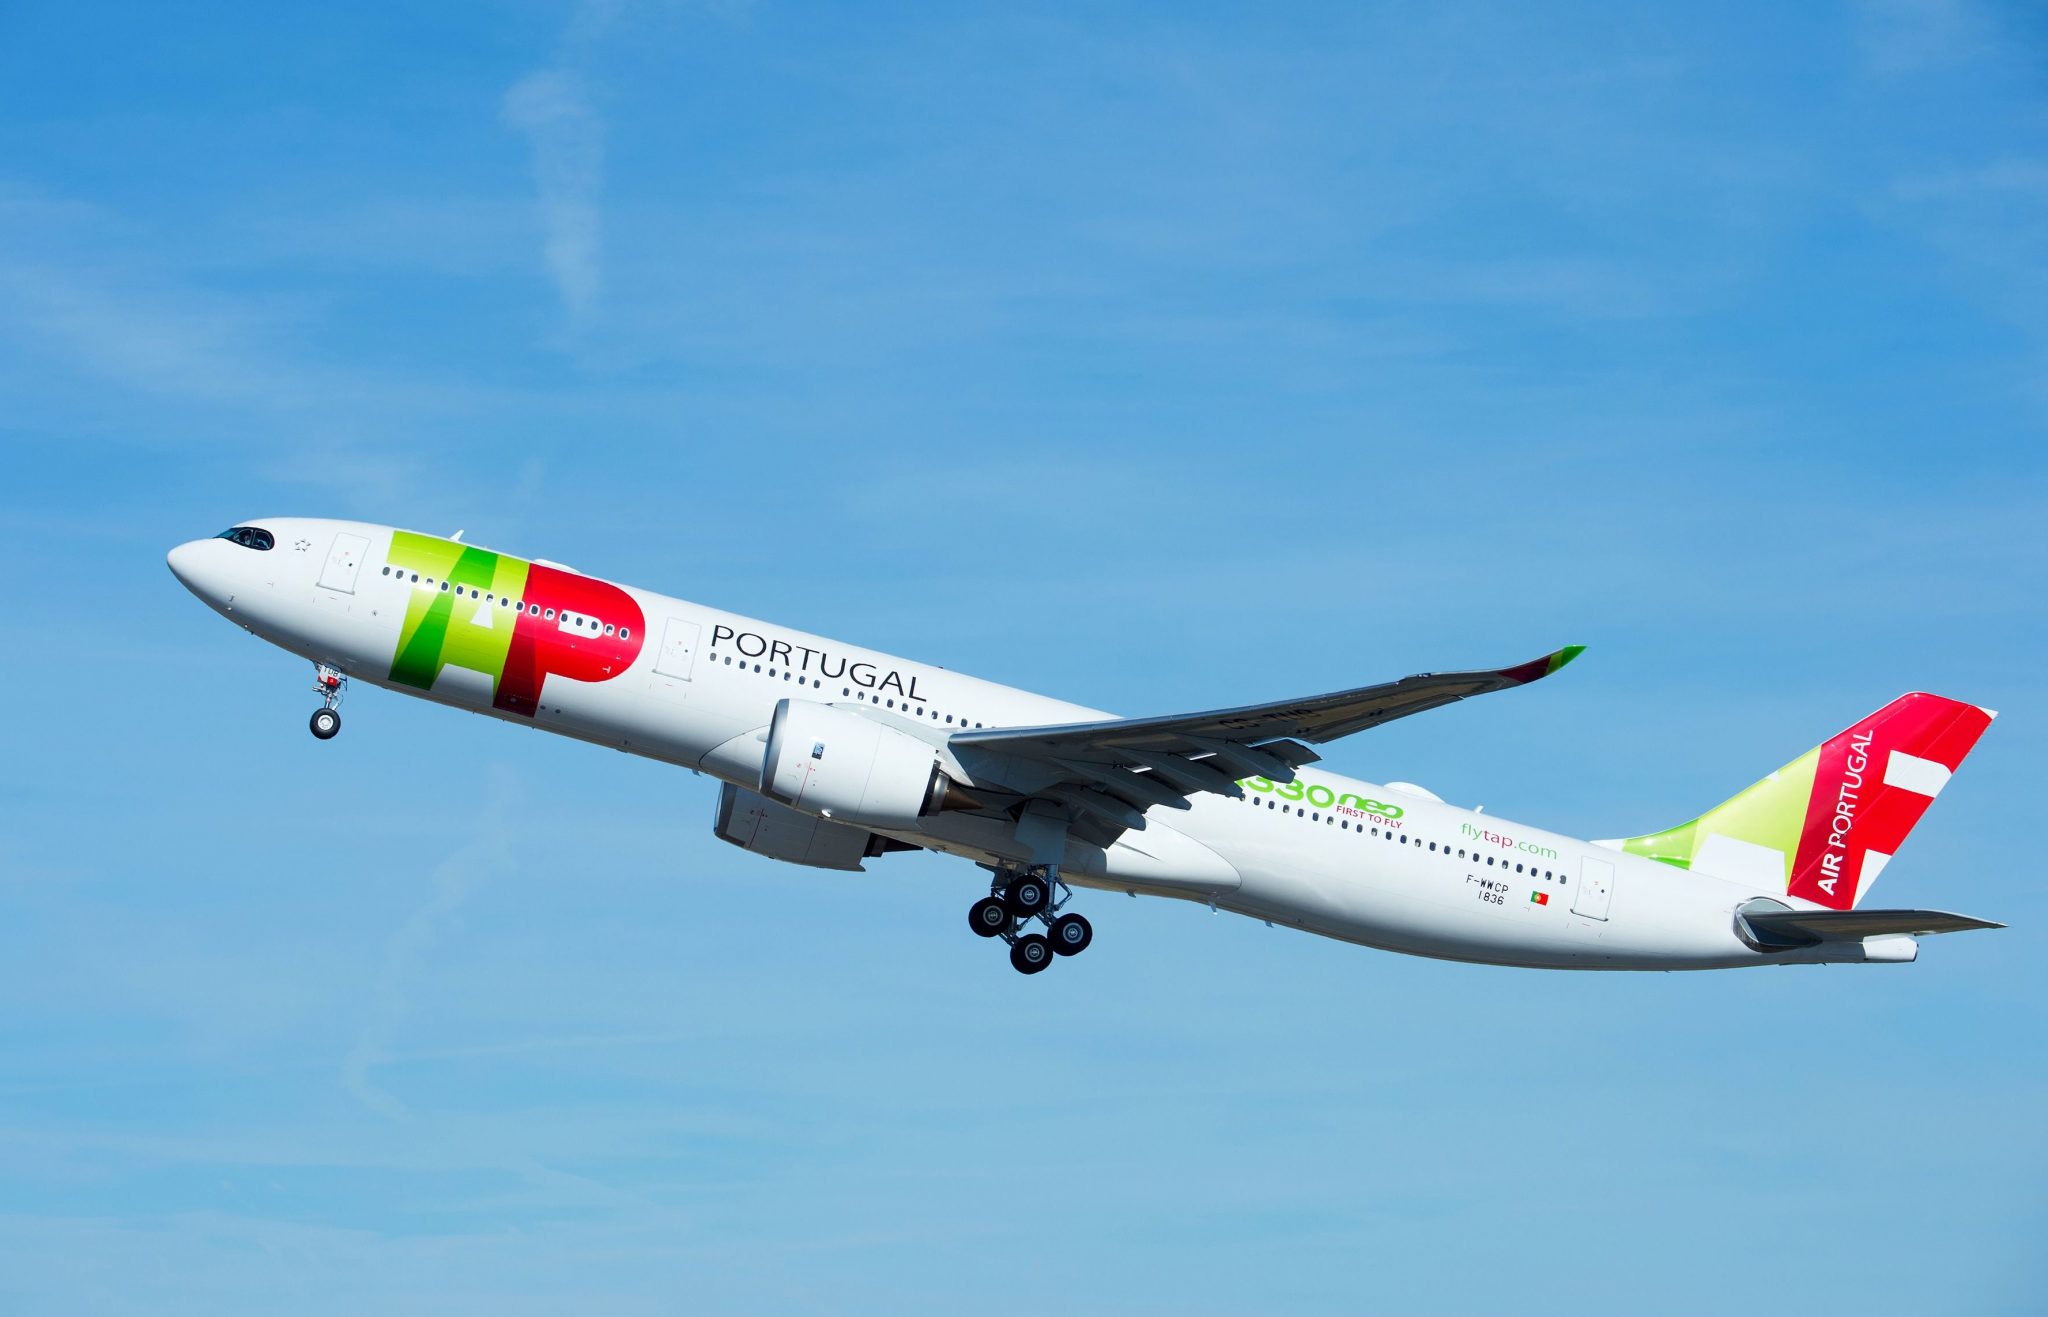 TAP Air Portugal became the launch customer for the Airbus A330neo in November 2018. Photo Credit: Airbus